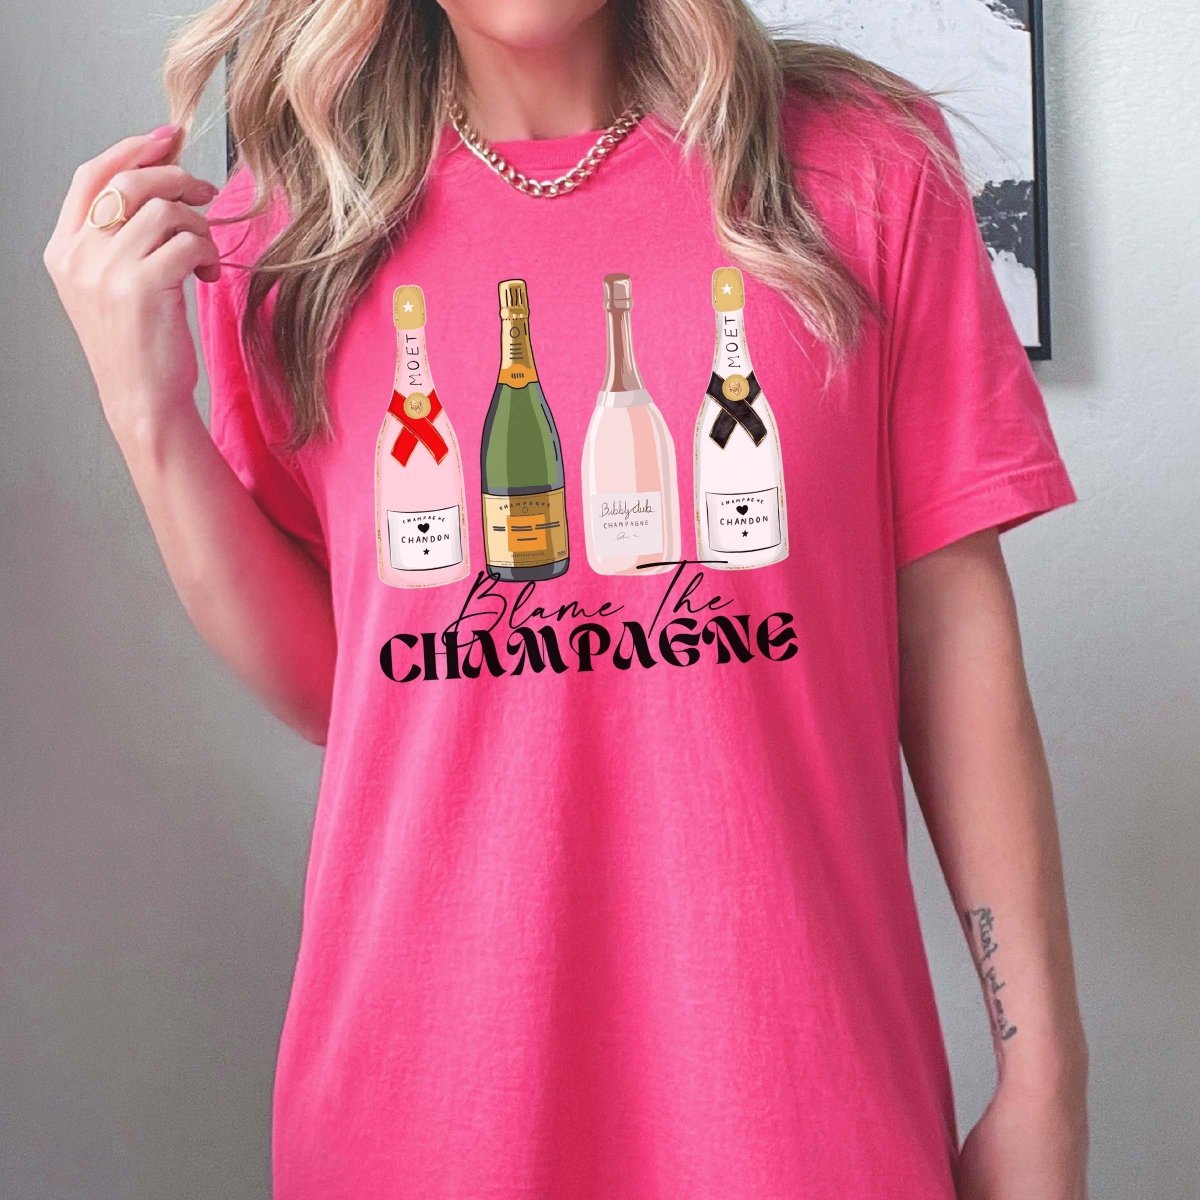 Blame the Champagne tee - Limeberry Designs